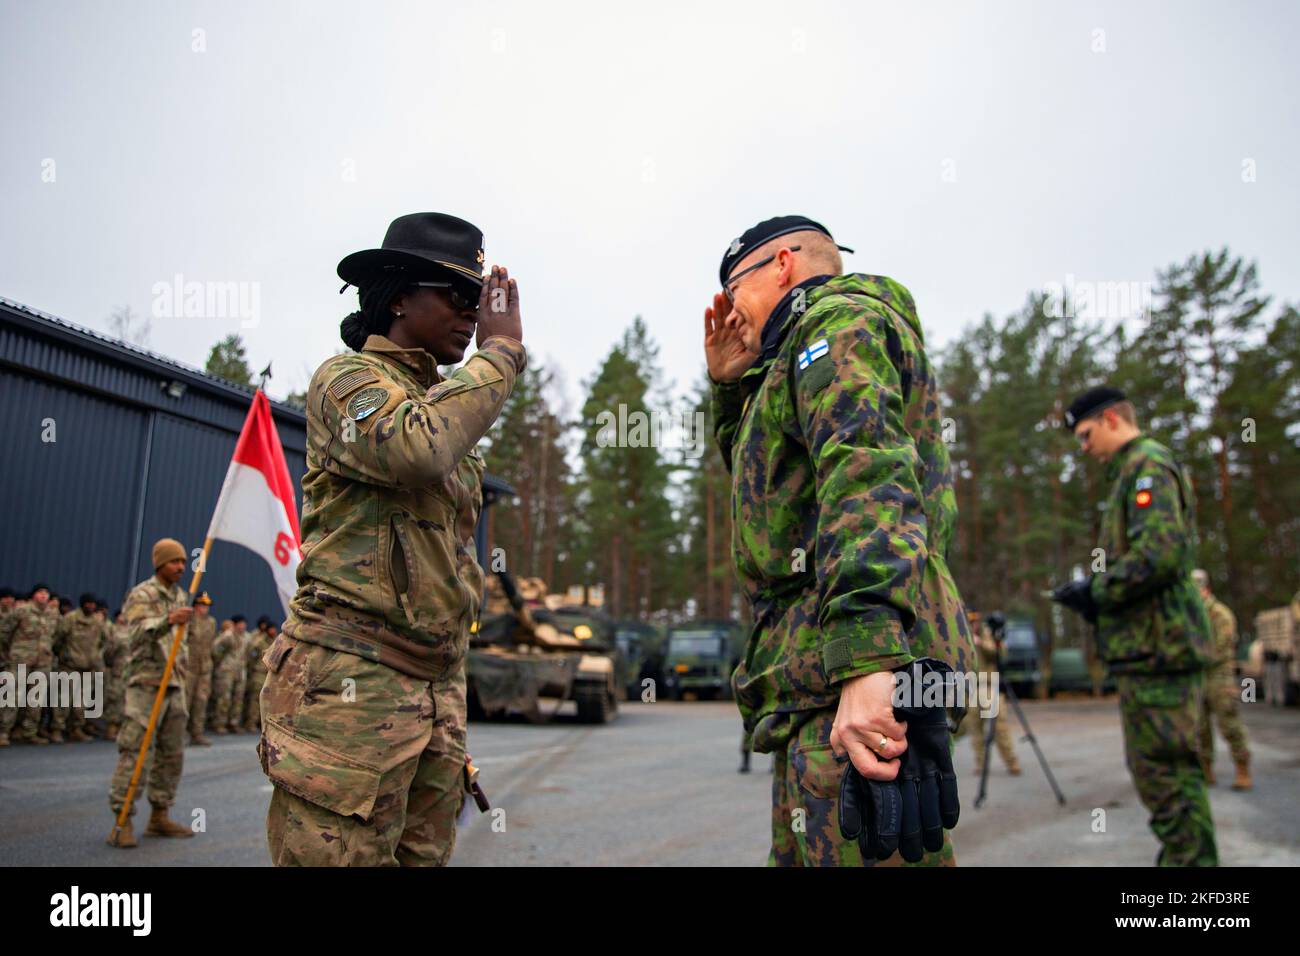 Niinisalo, Finland. 5th Nov, 2022. Col. Rainer Kuosmanen, commander of the Finnish Armored Brigade, salutes U.S. Capt. Anna Jones, a troop commander with 6th Squadron, 9th Cavalry Regiment, 3rd Armored Brigade Combat Team, 1st Cavalry Division (3-1 ABCT), operationally assigned to the 1st Infantry Division (1 ID), after presenting her with a traditional Finnish knife honoring her work during Hammer 22, an annual combined forces exercise conducted by and alongside Finland's Army Headquarters, Armored Brigade, Pori Brigade, Karelia Brigade, Uti Jaeger Regiment and Logistics Department of Stock Photo